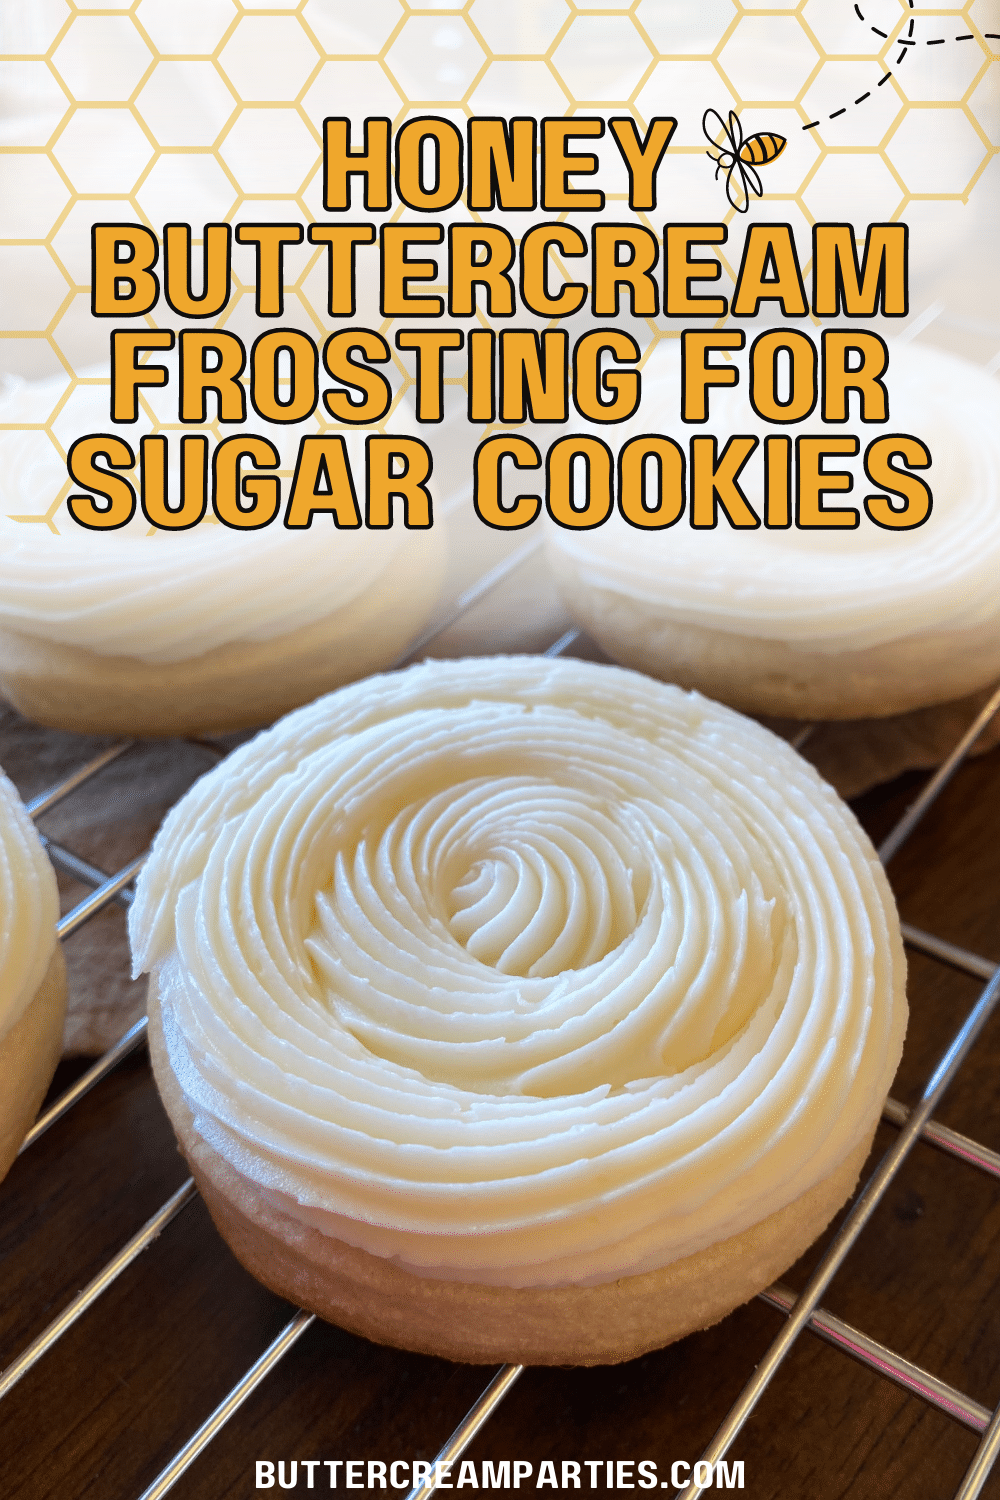 Honey Buttercream Frosting for Sugar Cookies that Crusts